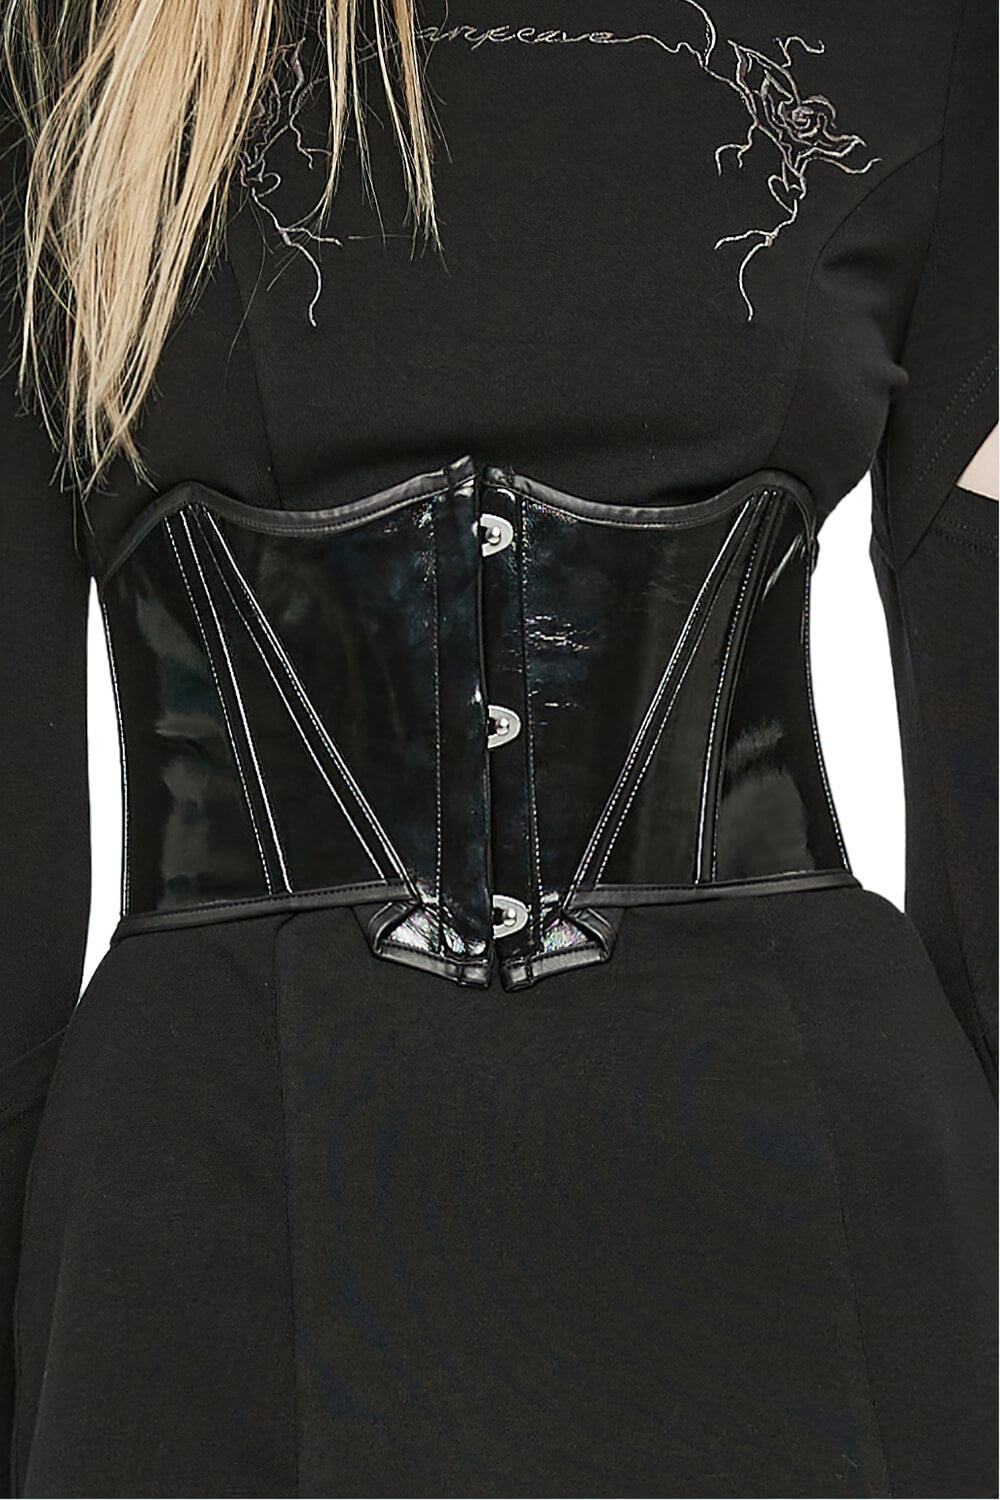 Gothic Lace-Up Cincher - Dark Elegance and Style